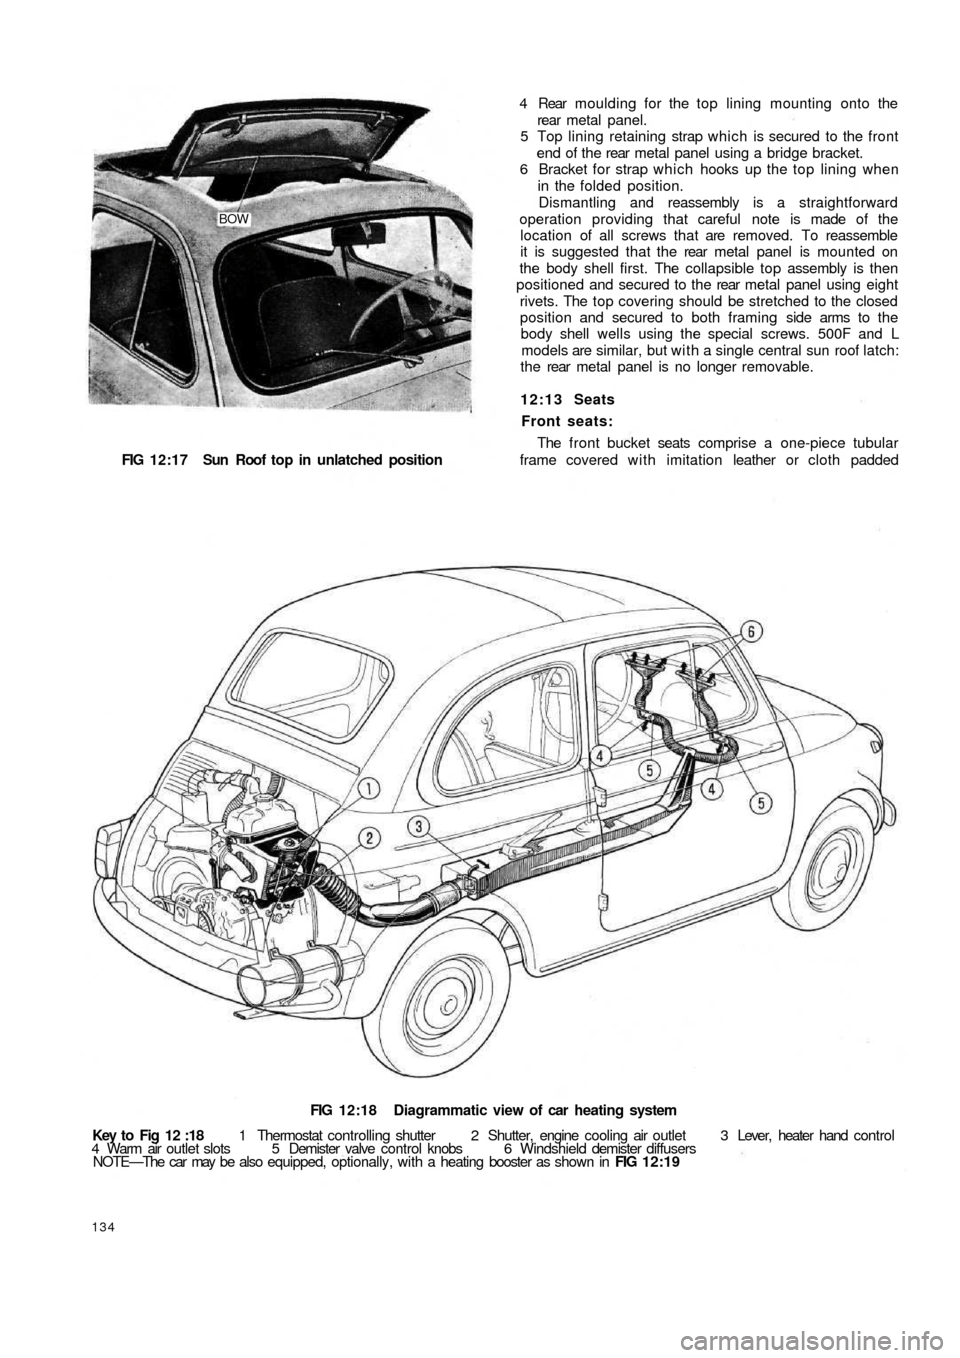 FIAT 500 1964 1.G Workshop Manual BOW
FIG 12:17  Sun Roof  top   in  unlatched position
FIG 12:18 Diagrammatic view of car heating system
Key to Fig 12 :18 1 Thermostat controlling shutter  2  Shutter,  engine  cooling air outlet  3 L